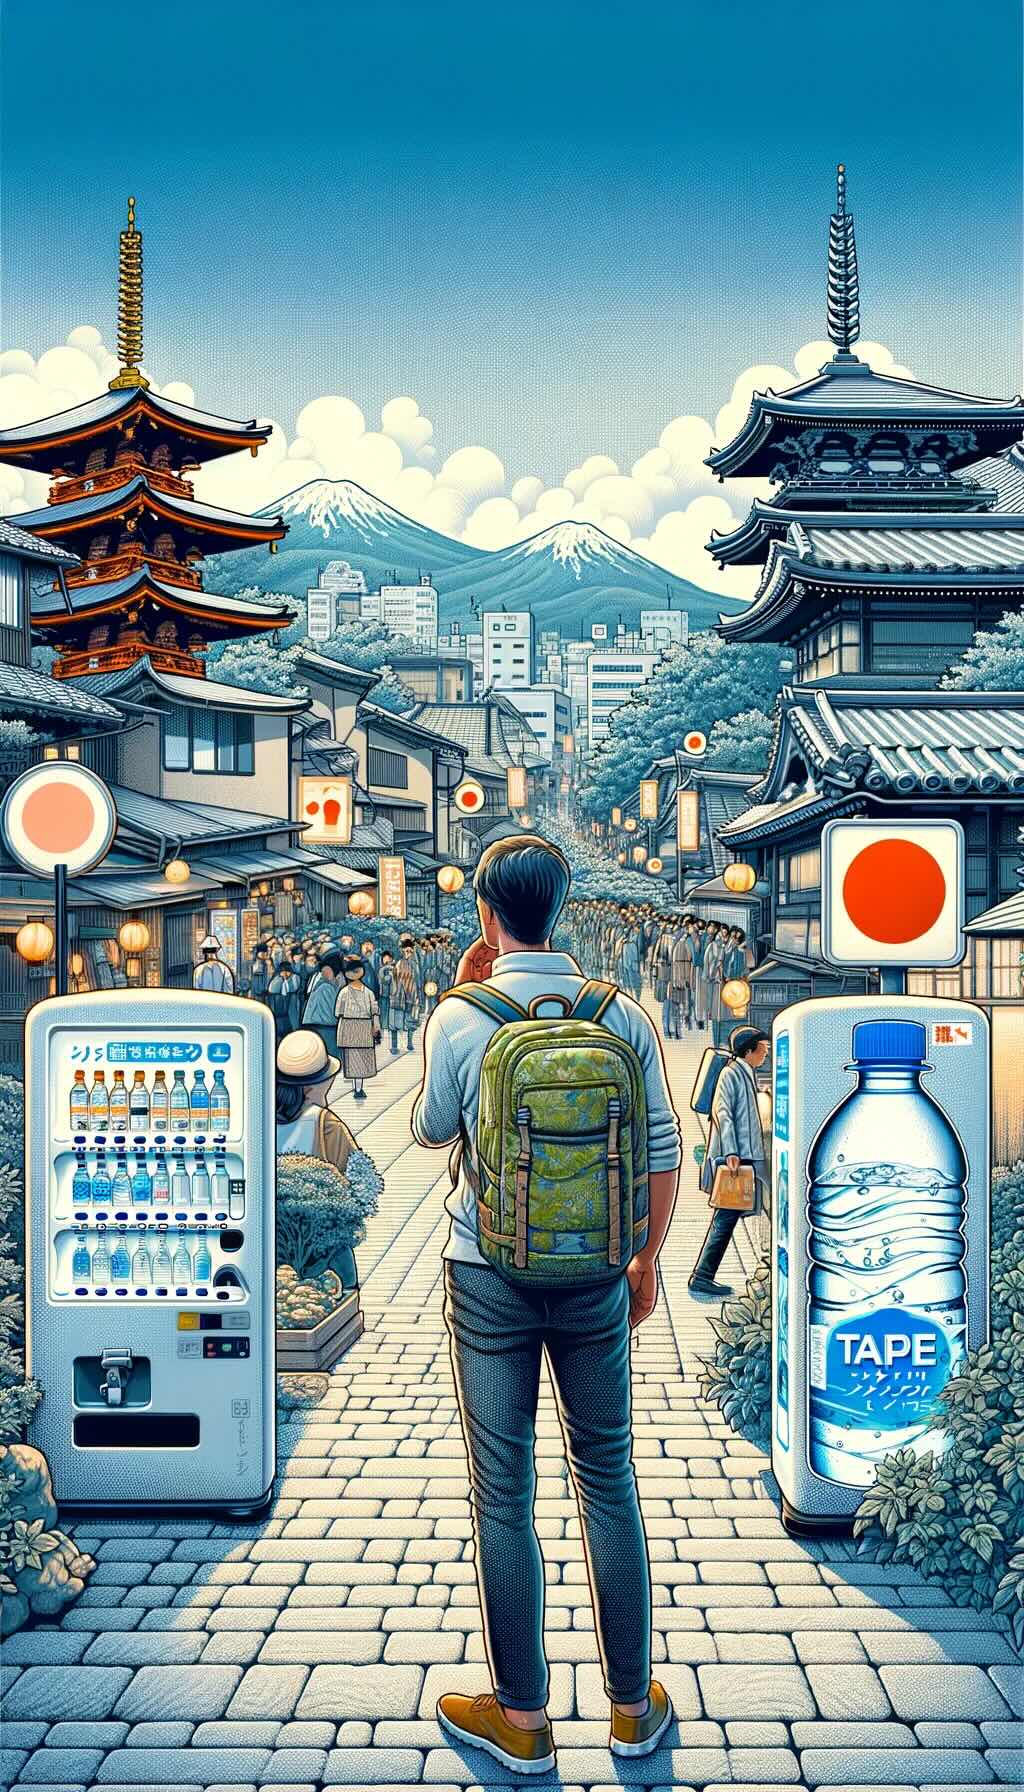 Concept of choosing between tap and bottled water in Japan for travelers illustrates a traveler pondering the hydration dilemma in various Japanese settings, including the streets of Tokyo, temples in Kyoto, and landscapes in Hokkaido. It shows the presence of bottled water in vending machines and the availability of tap water, highlighting the decision-making process of a savvy traveler. The image captures the essence of staying hydrated while exploring Japan, focusing on the importance of making safe and informed choices for health and adventure, and is visually appealing and engaging, conveying the significance of understanding and navigating the local environment regarding water consumption.